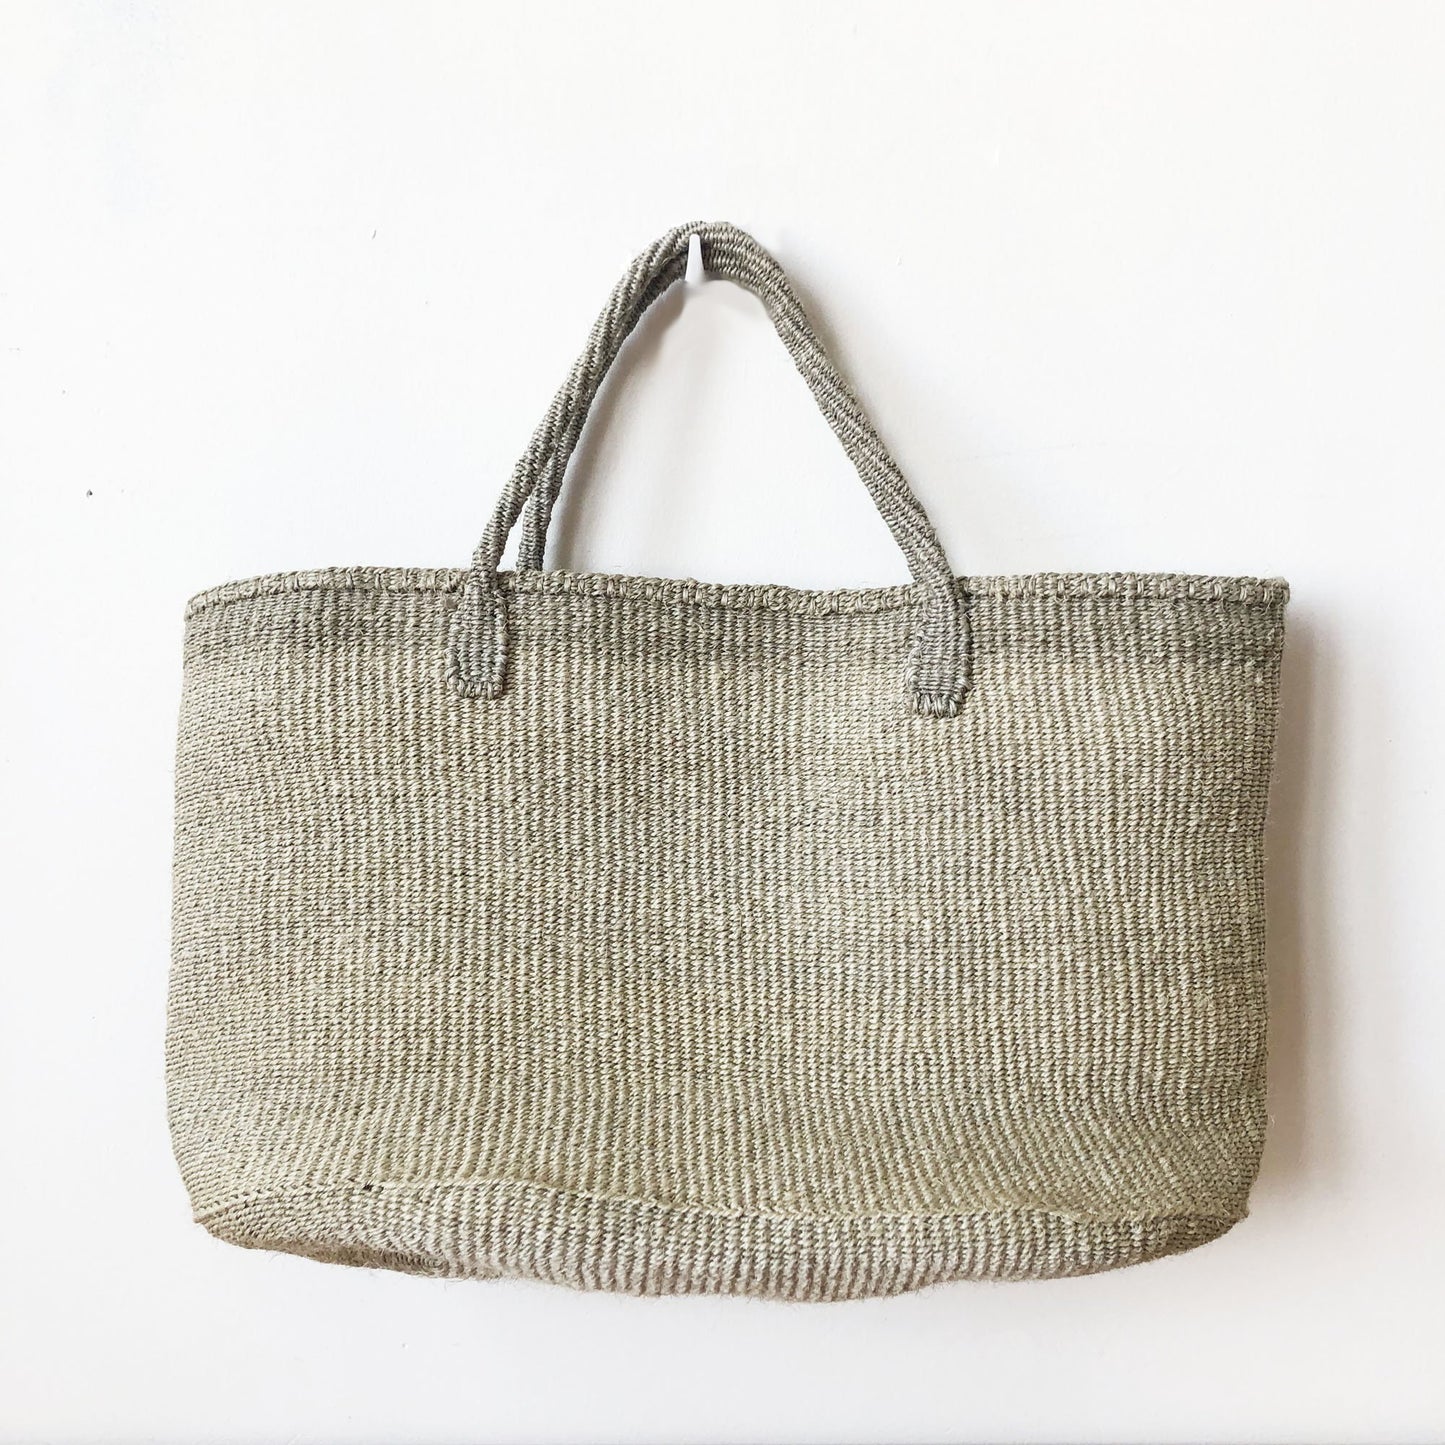 Eco-friendly Ethically Handmade Small Batch Handwoven Grey Sisal Tote